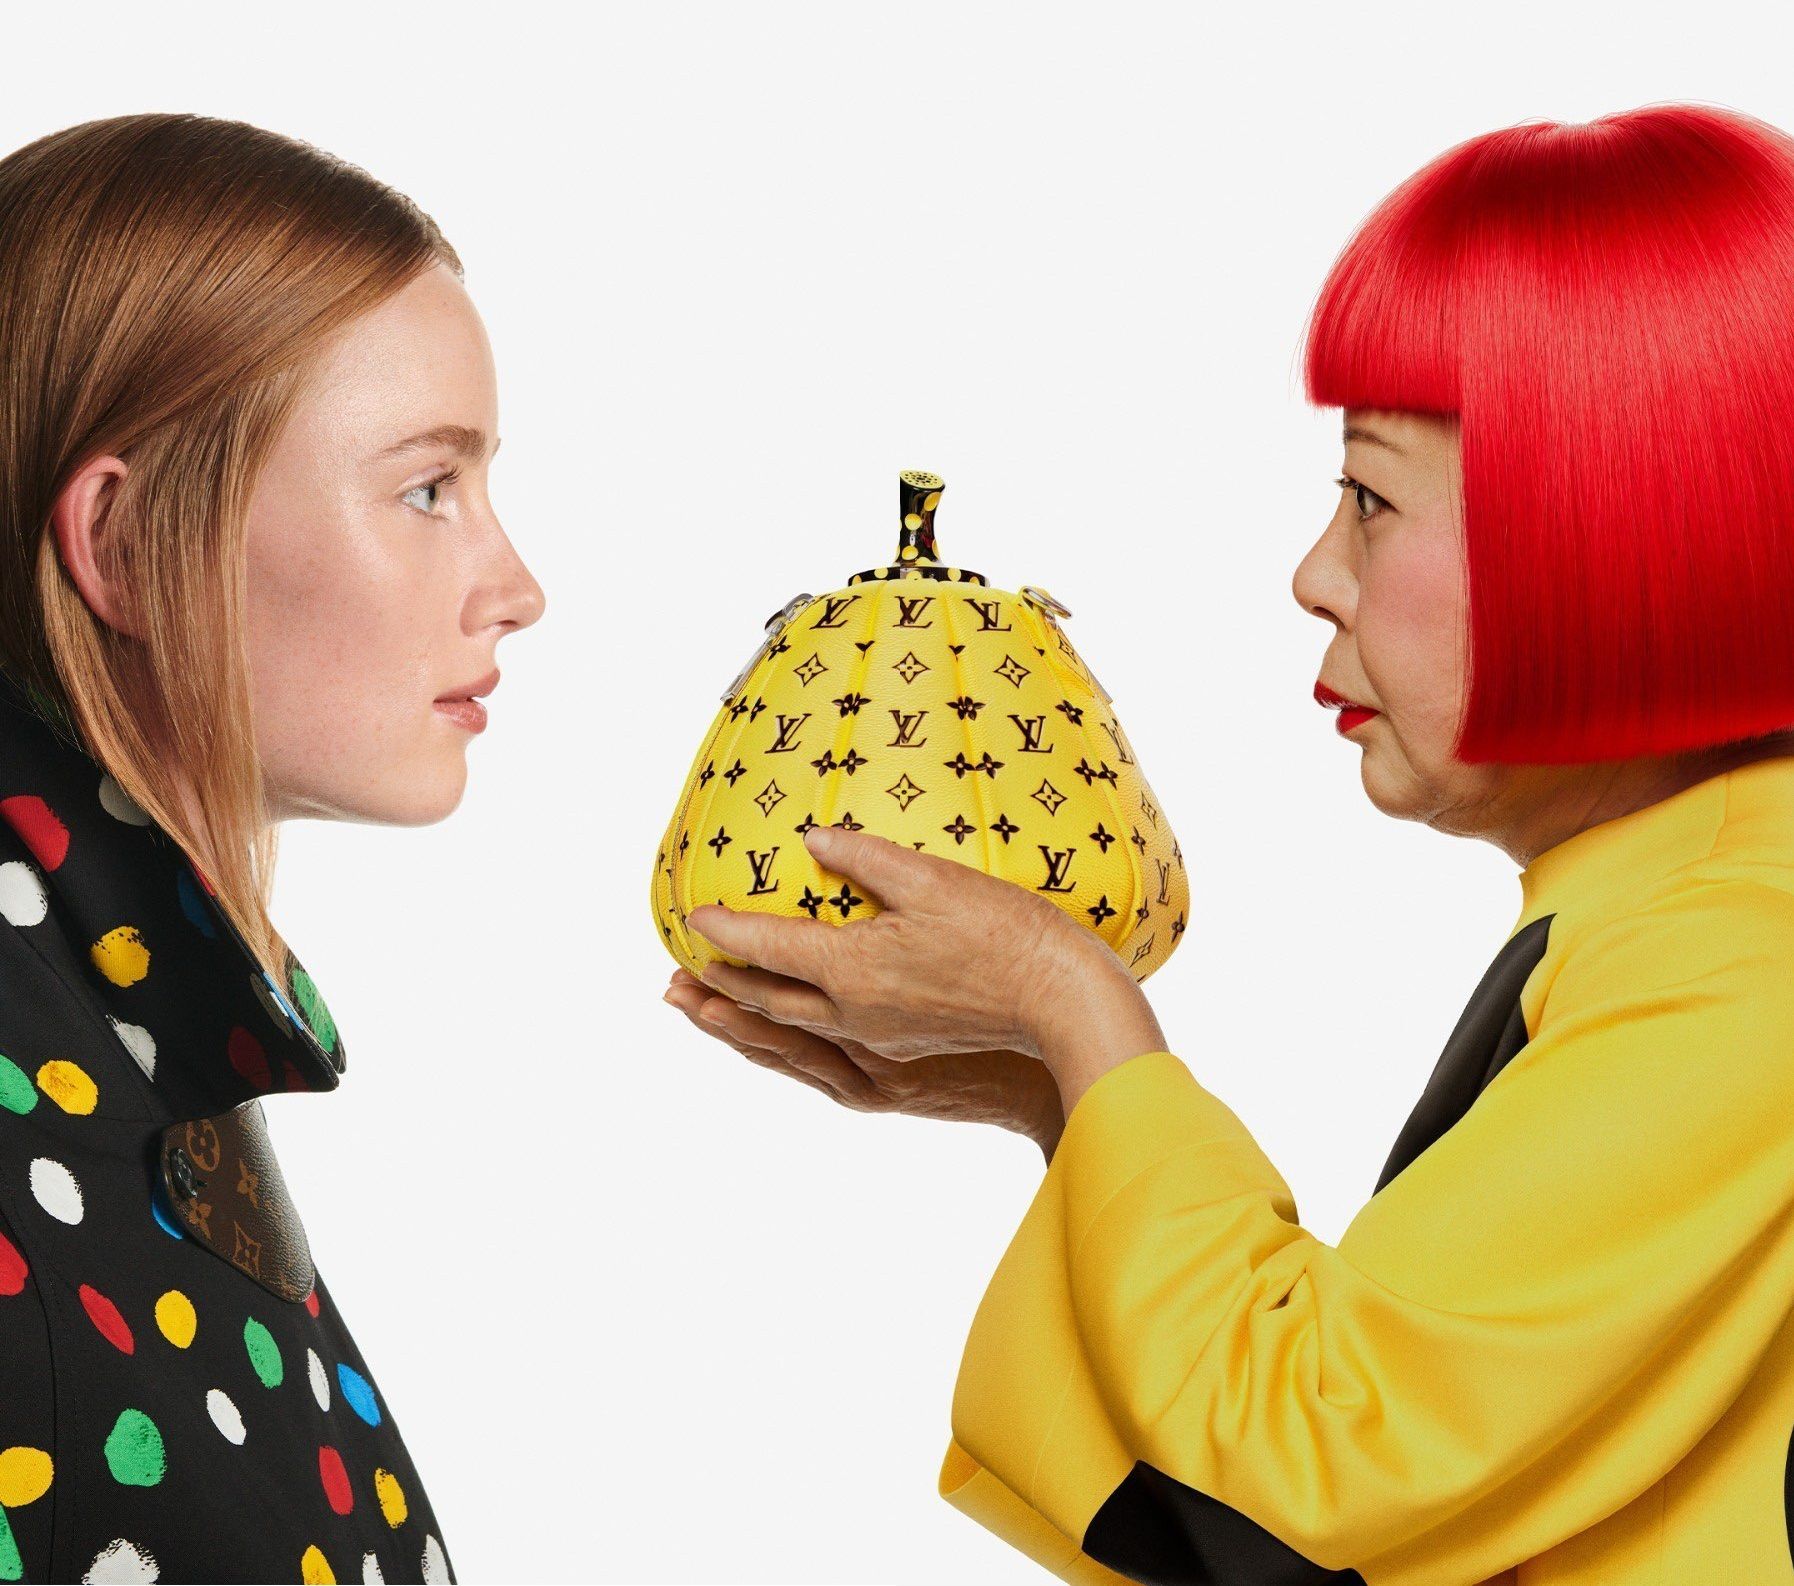 Louis Vuitton and Yayoi Kusama team up after a decade with their